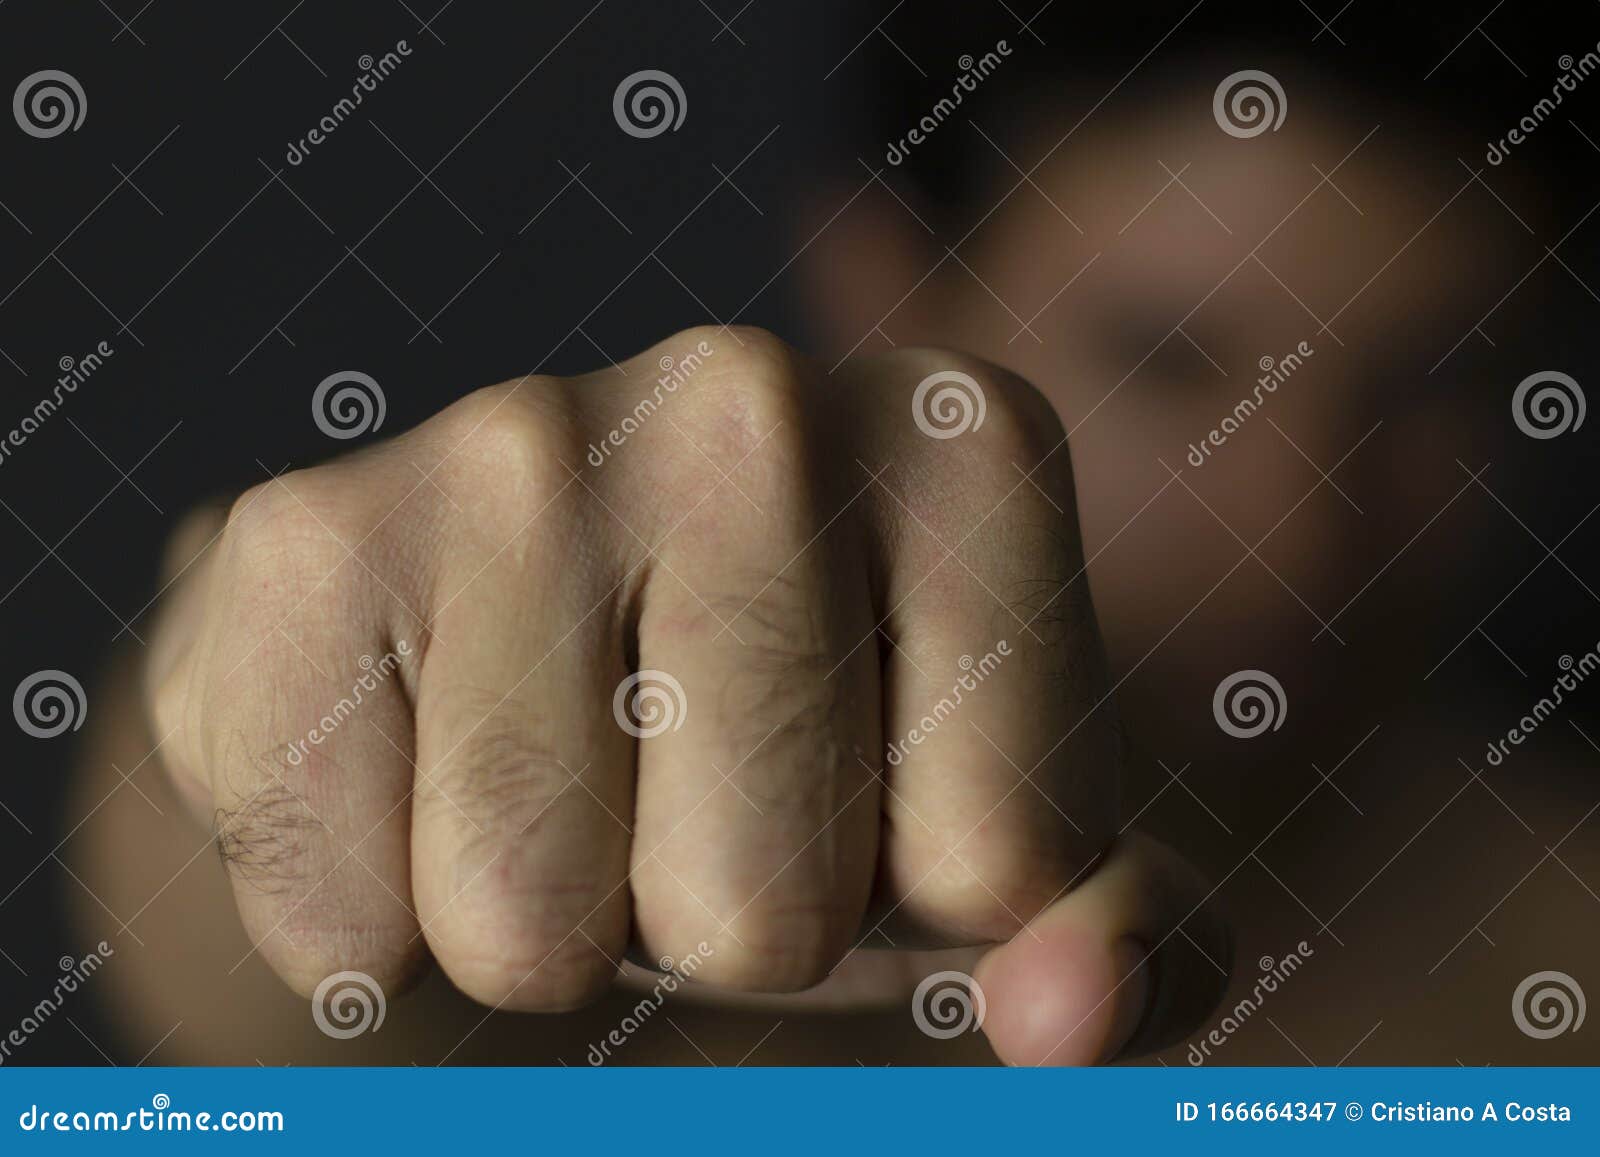 man throwing punch with blurred background